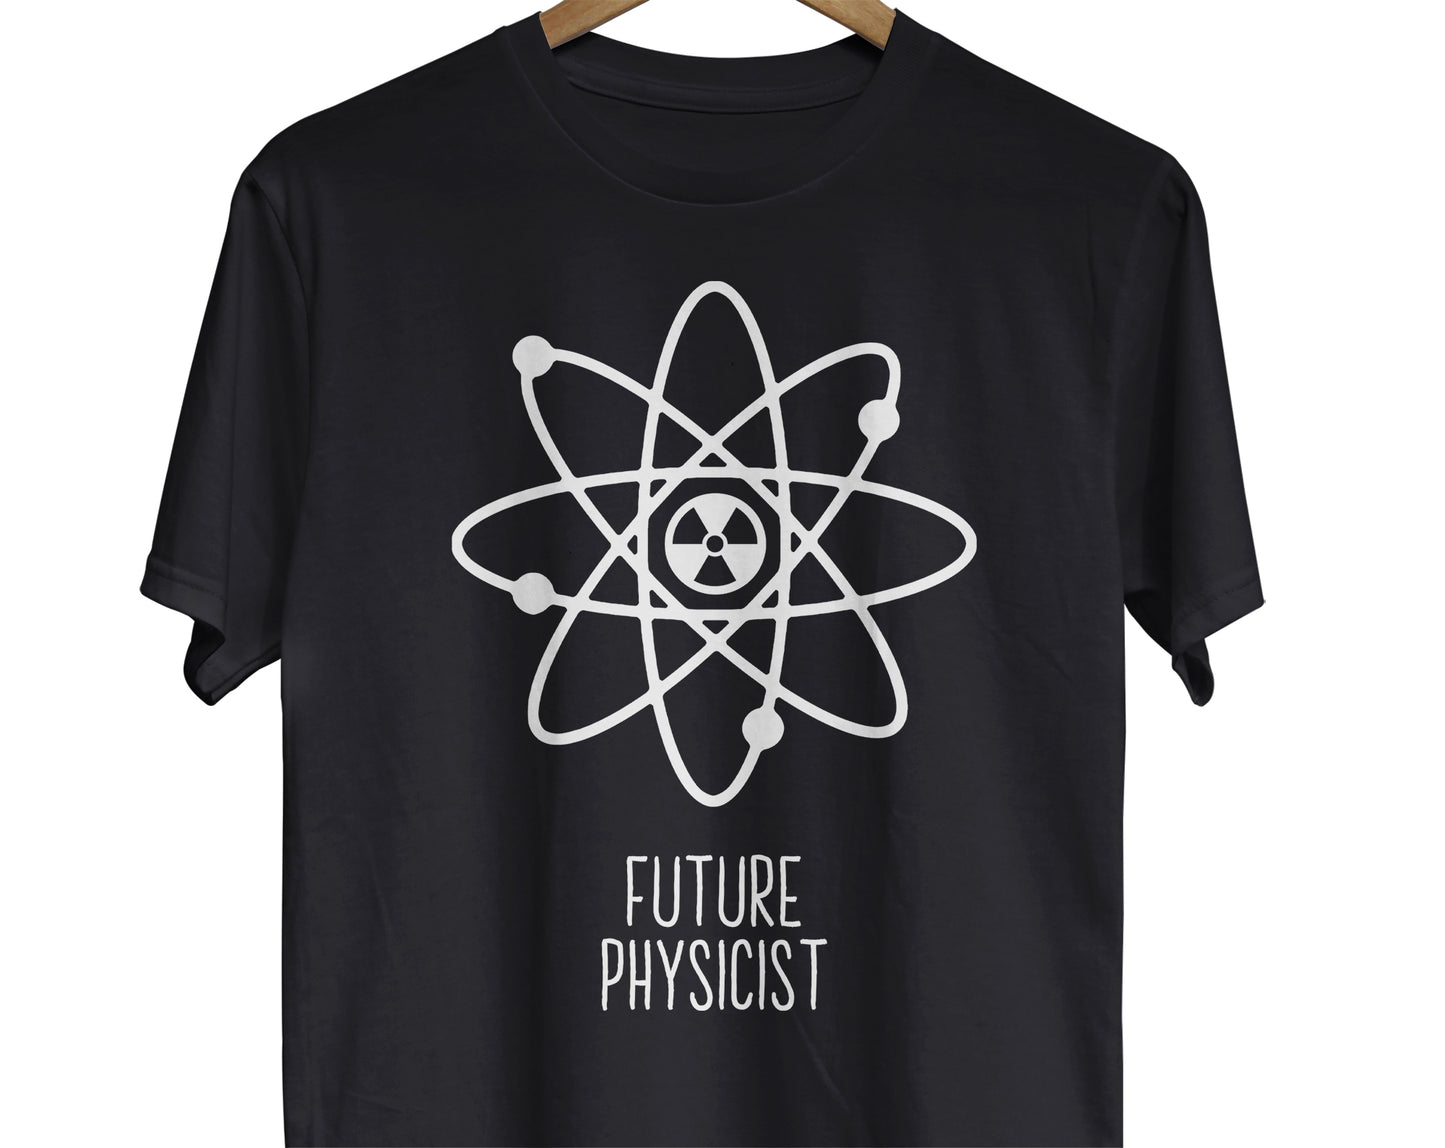 A science t-shirt featuring an atom image with a radiation symbol in the center and the text "Future Physicist"